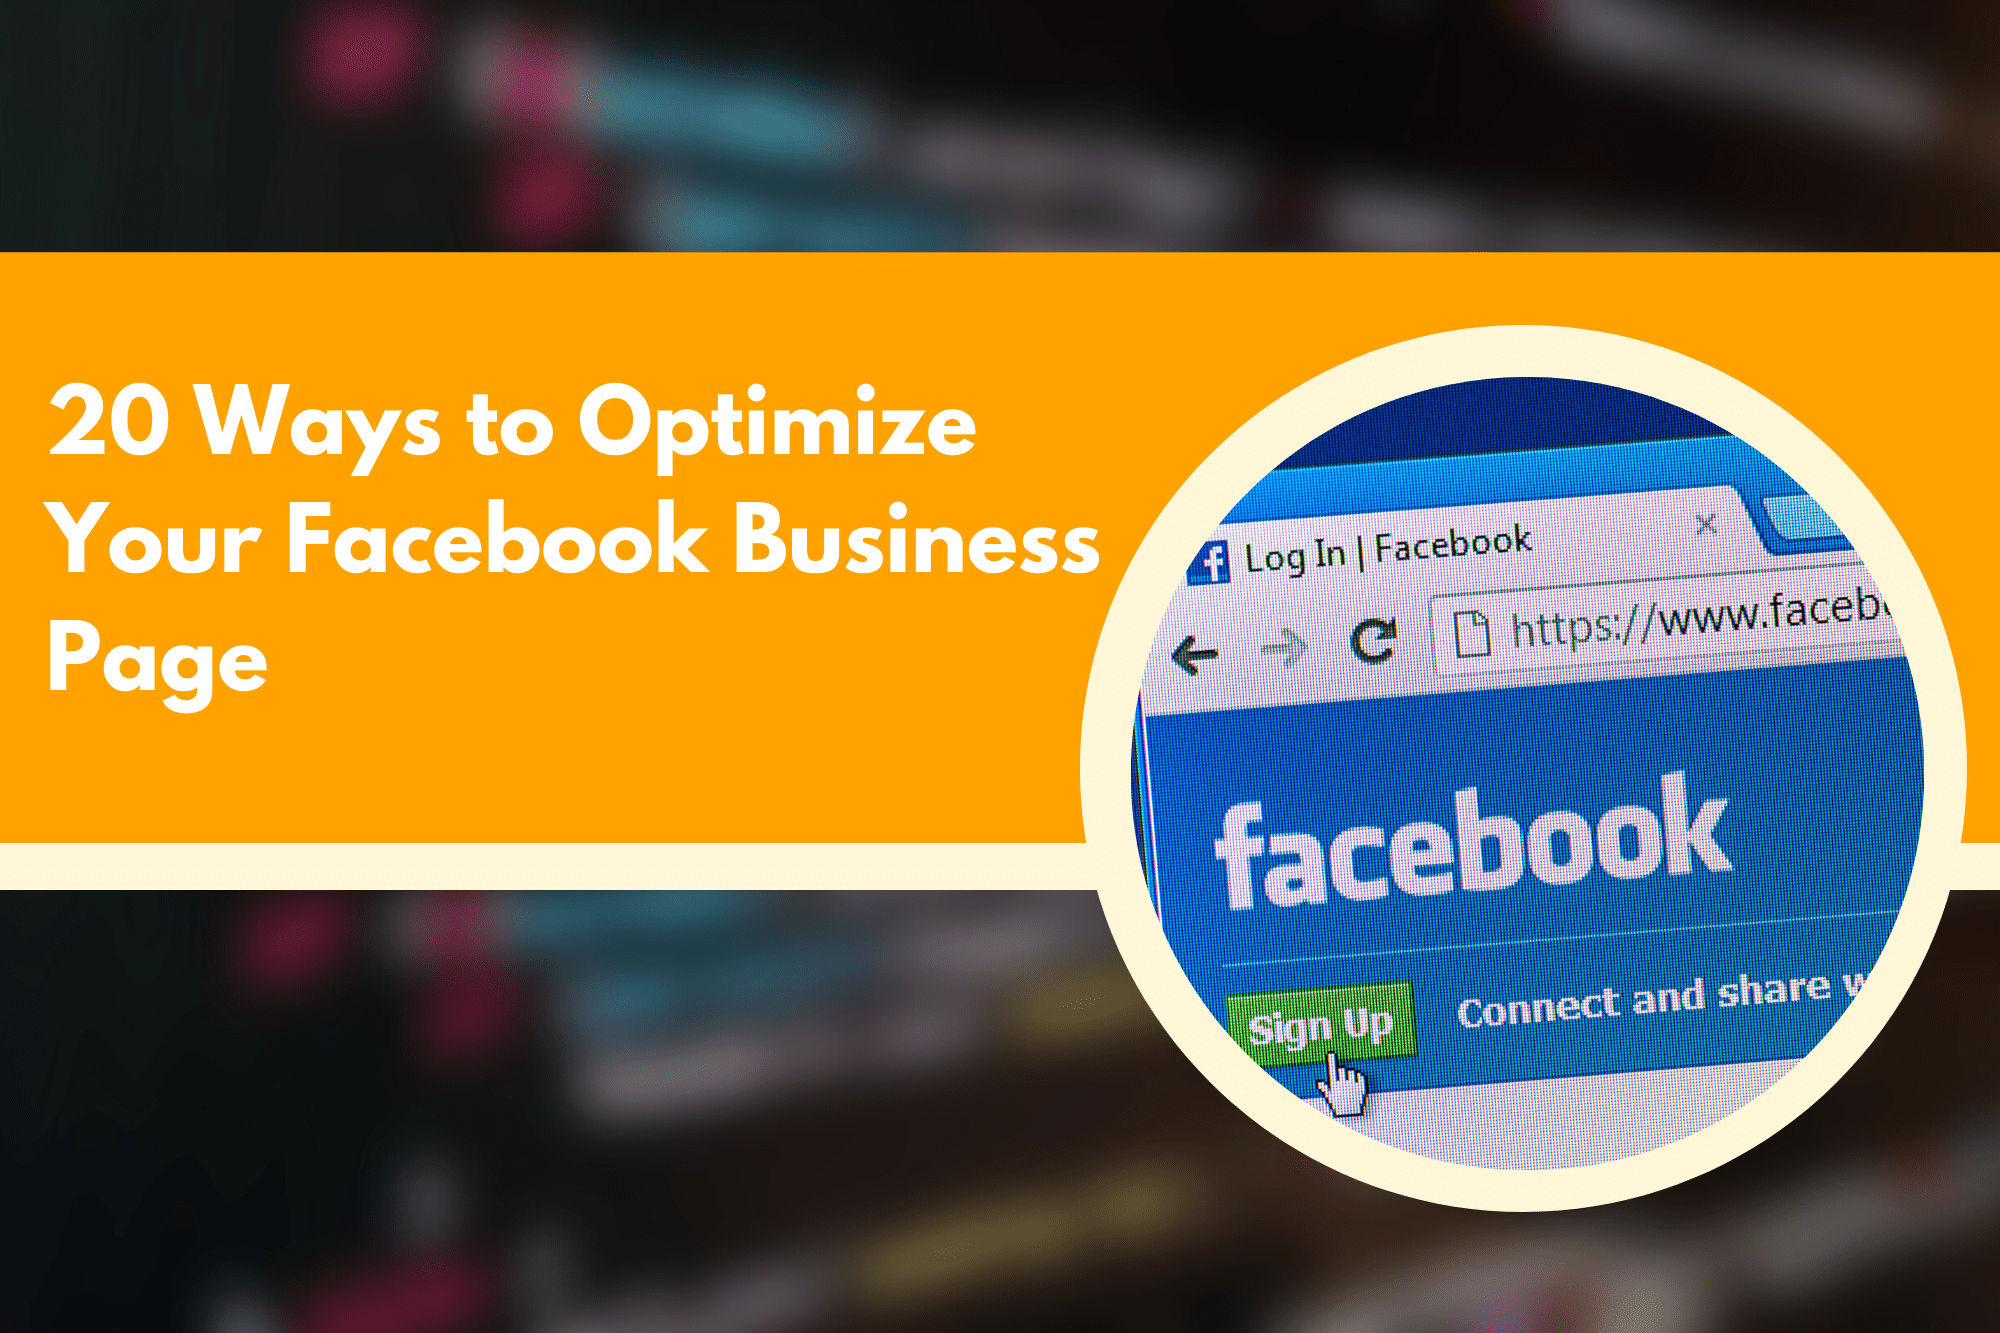 20 Ways to Optimize Your Facebook Business Page